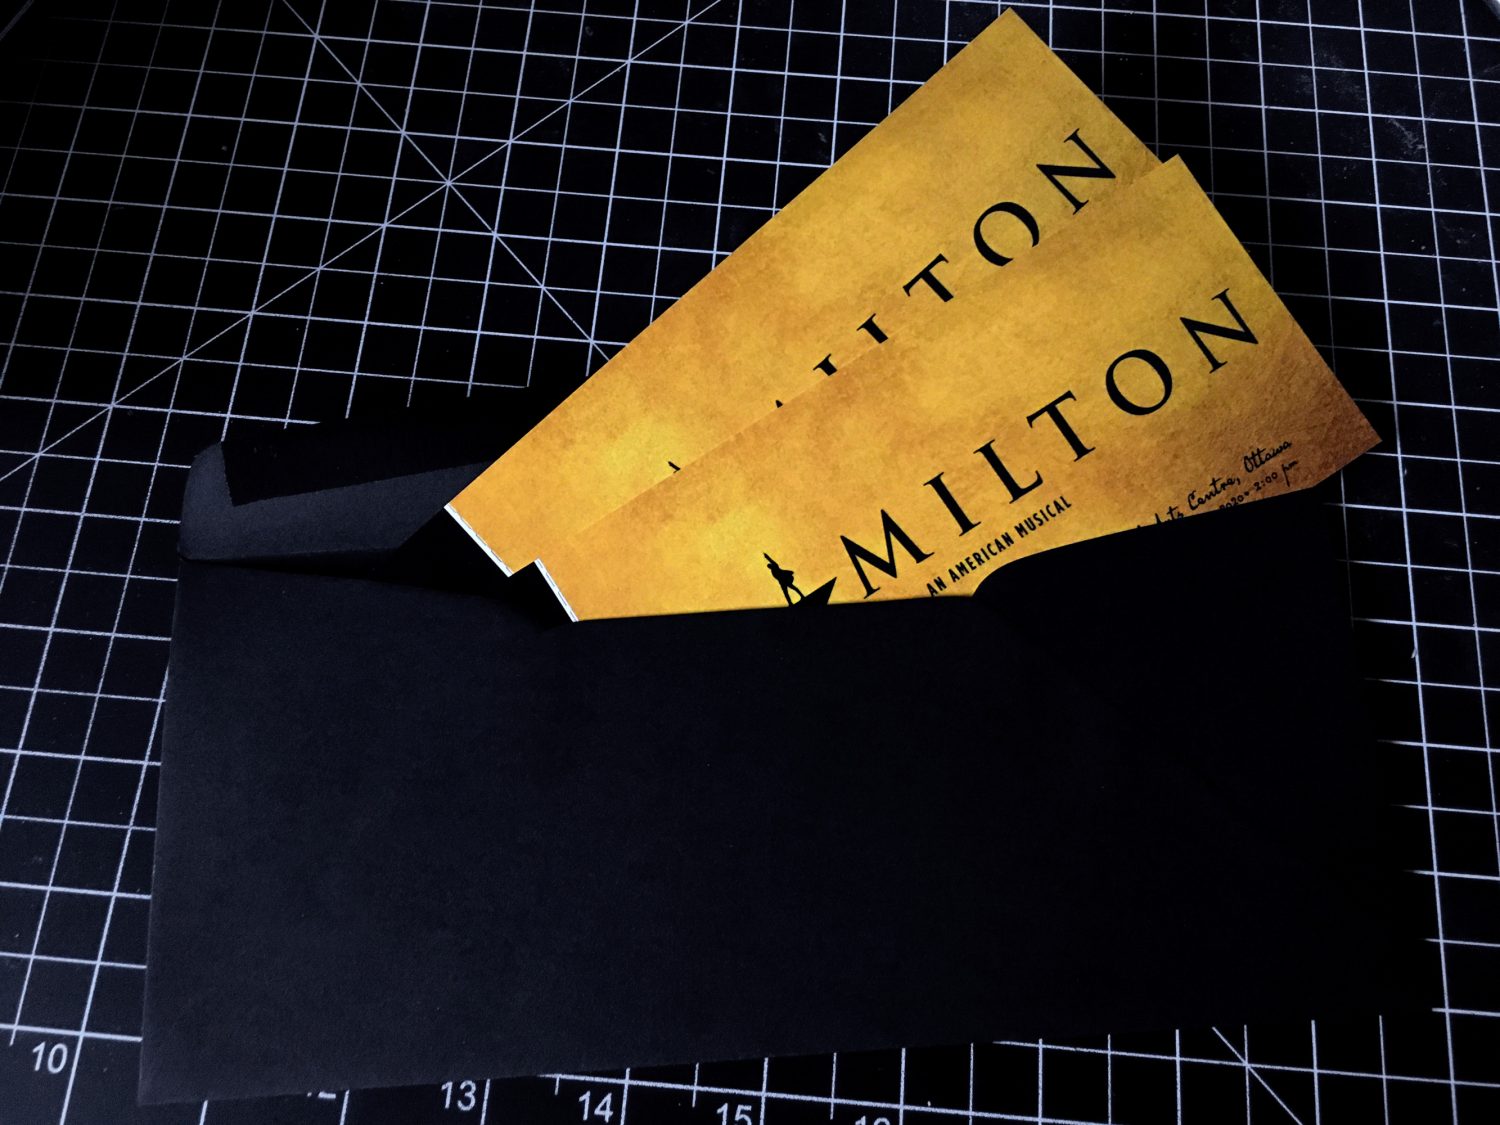 Hamilton Tickets and accompanying envelope